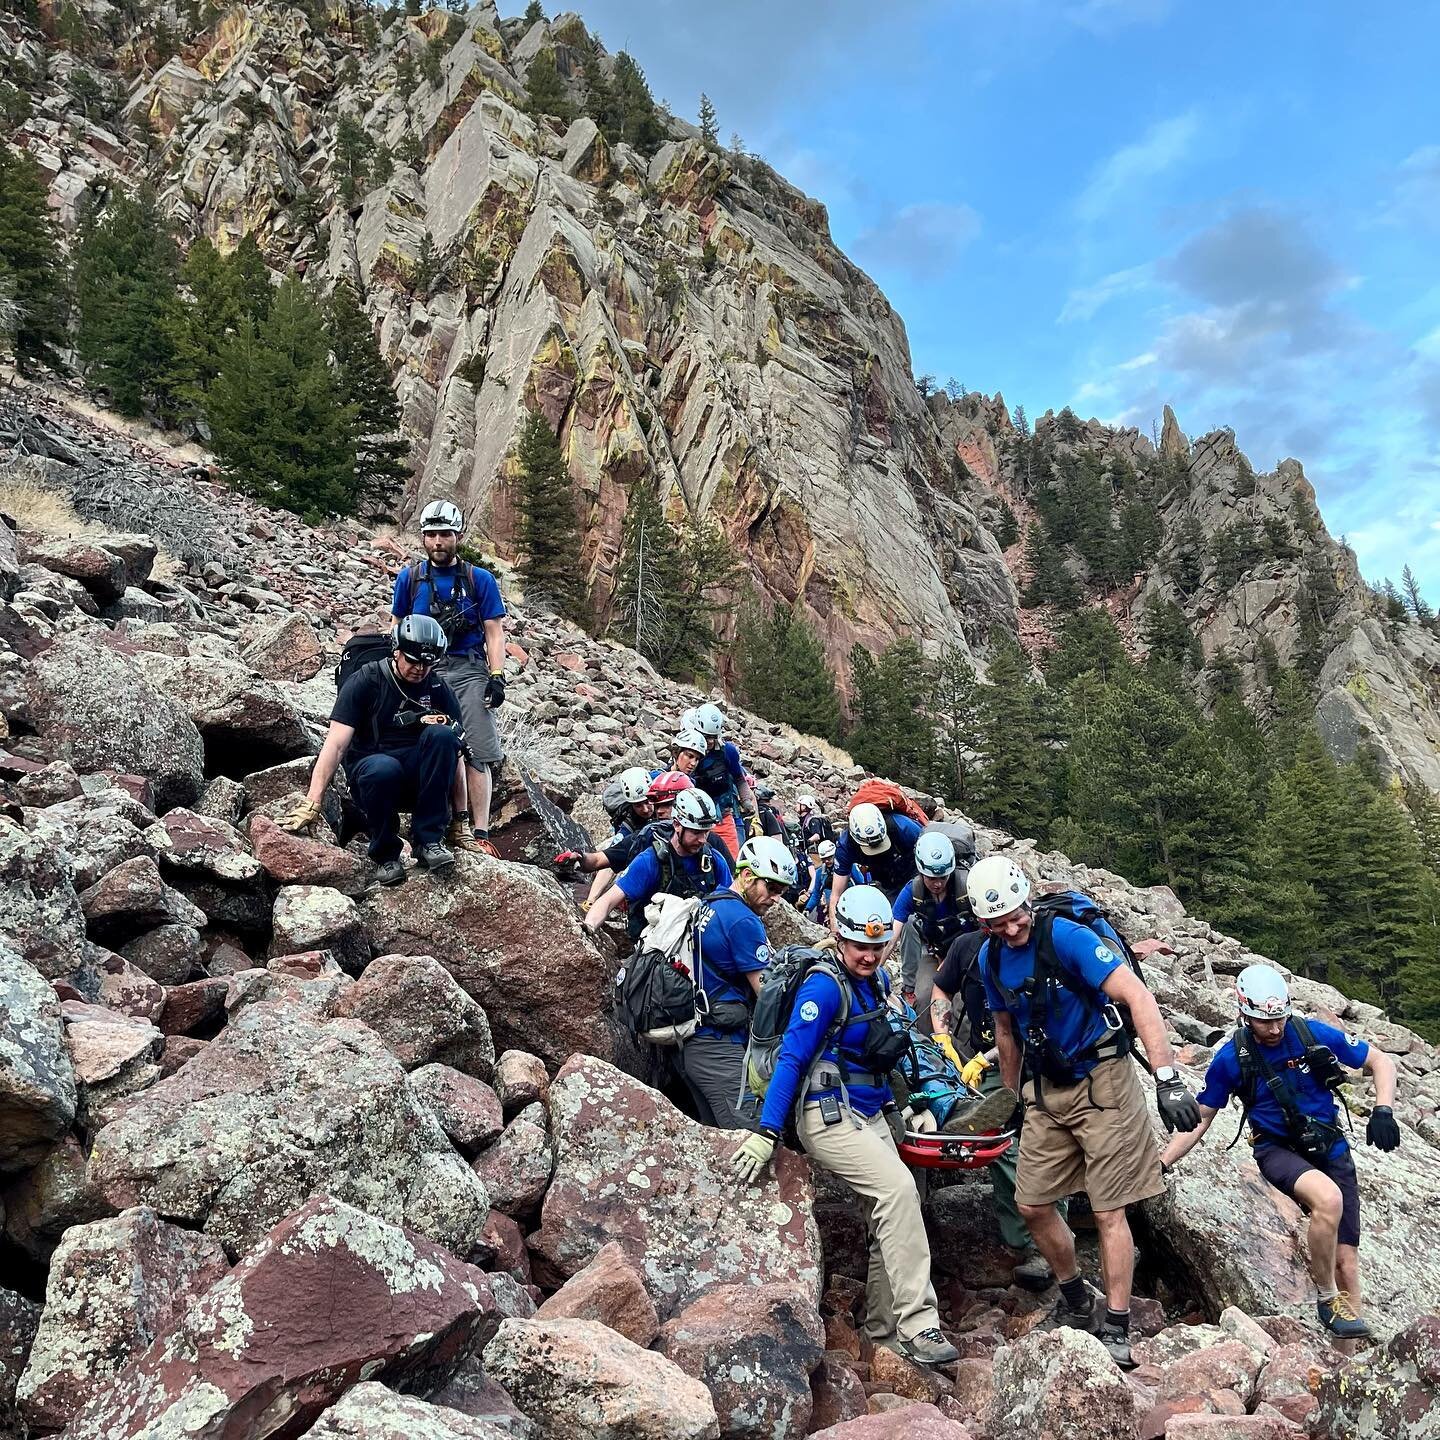 Yesterday we assisted a hiker who injured his leg while hiking off-trail in Eldorado Canyon State Park. The hiker, who was in a loose gully north of Shirttail peak, yelled to get the attention of nearby climbers who were able to call 911.